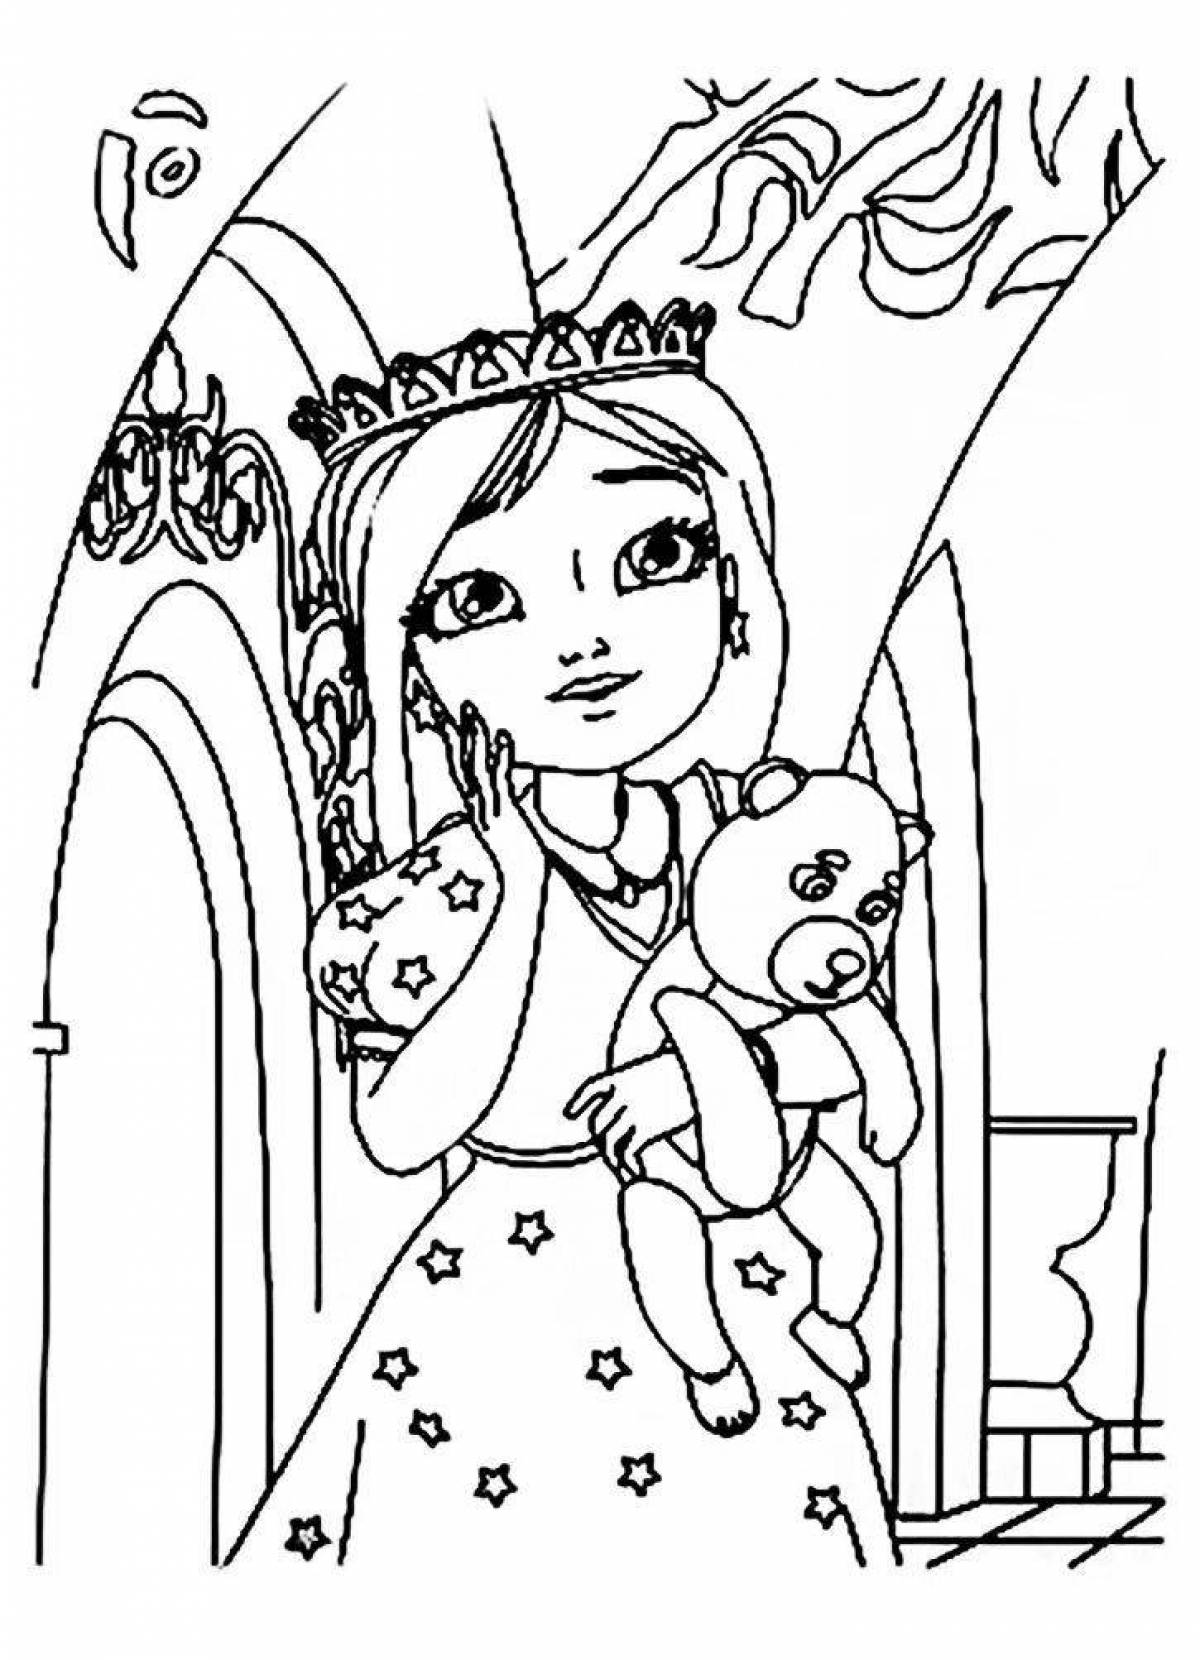 Surprise coloring book for girls 5-6 years old from cartoons